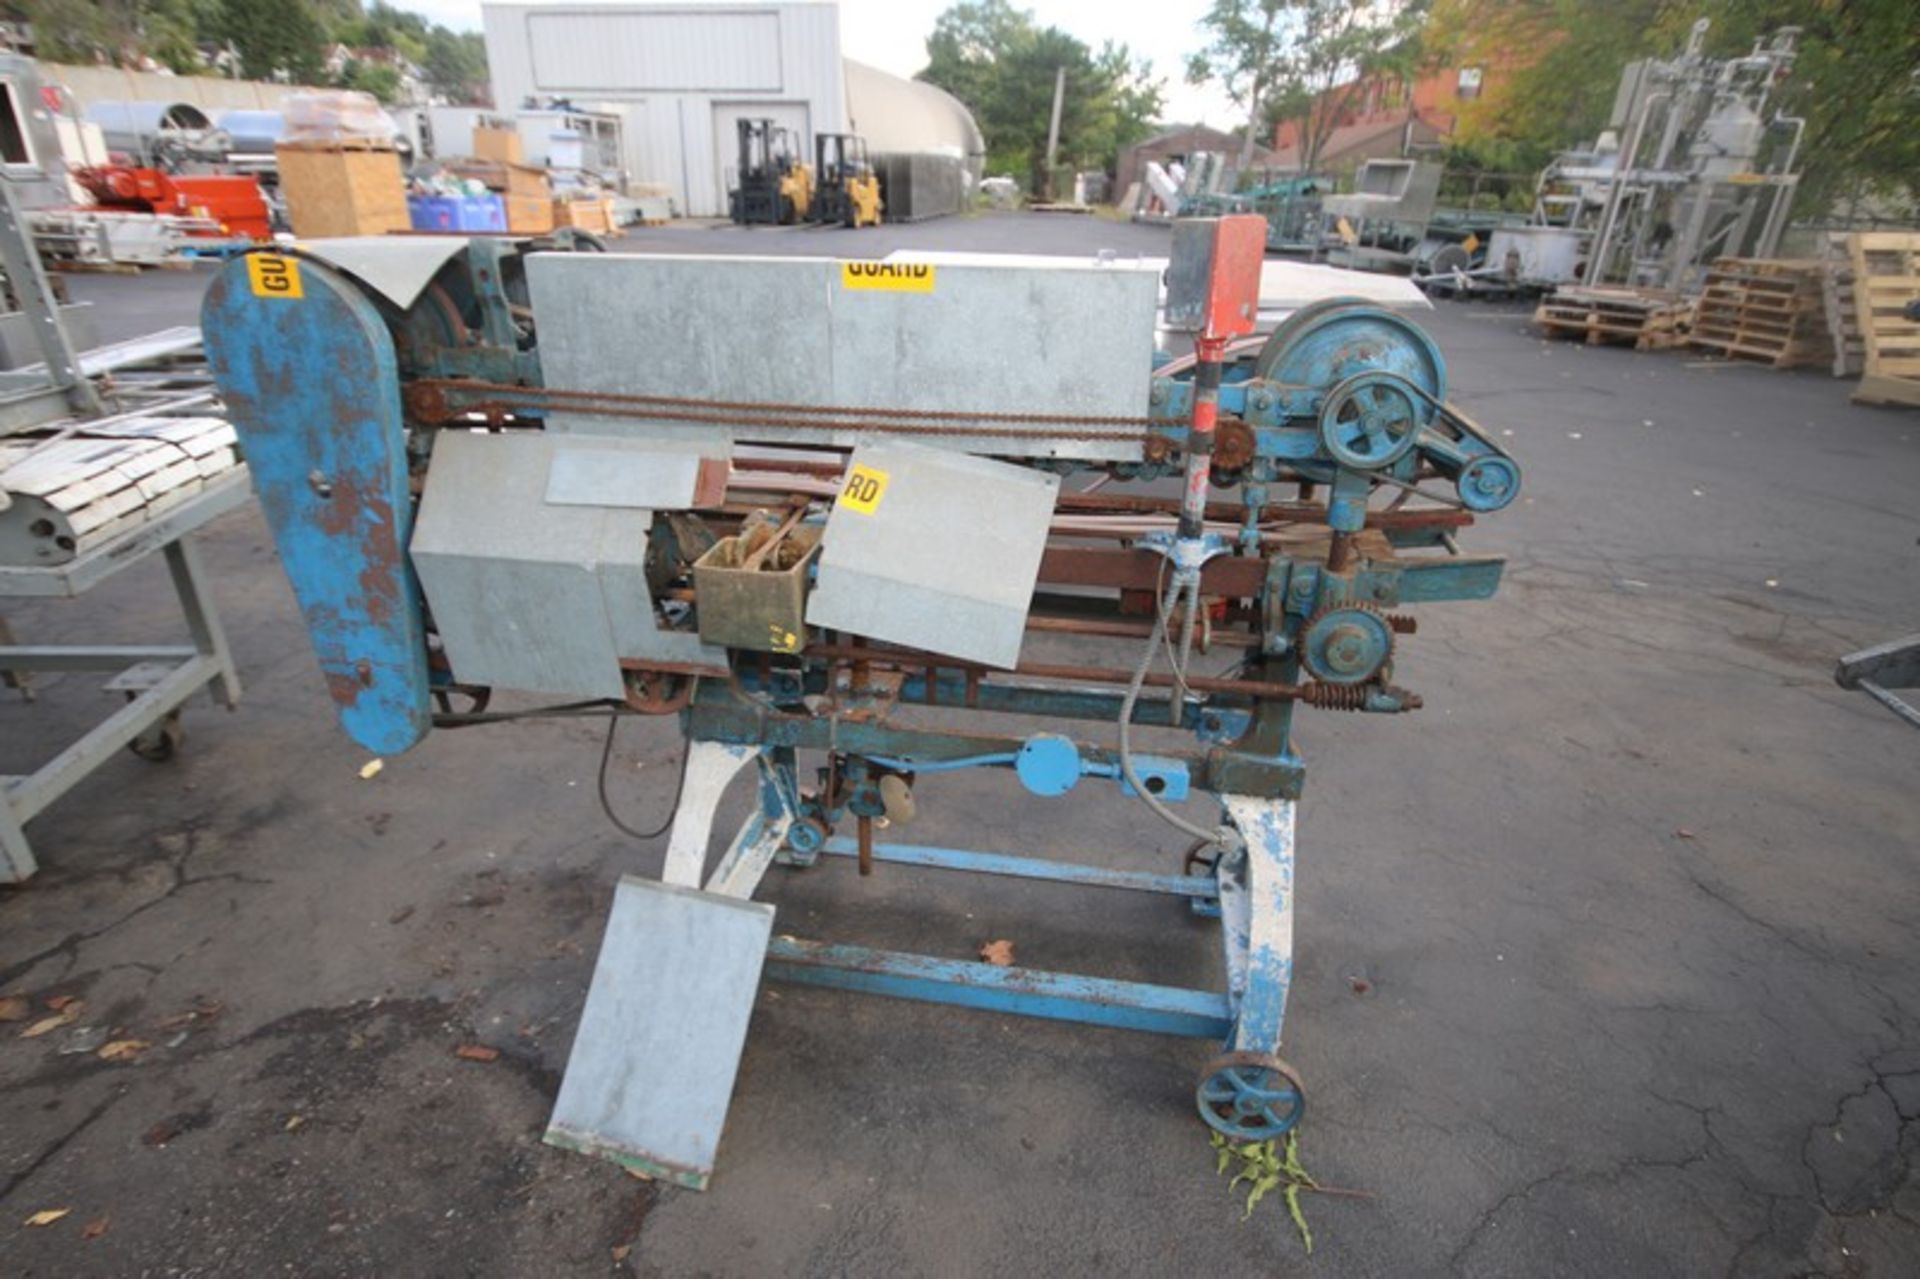 Burt Roll Through Labeling Machine, S/N 13465 - Possibly Missing Parts (INV#73223) (LOCATED AT MDG - Image 5 of 5